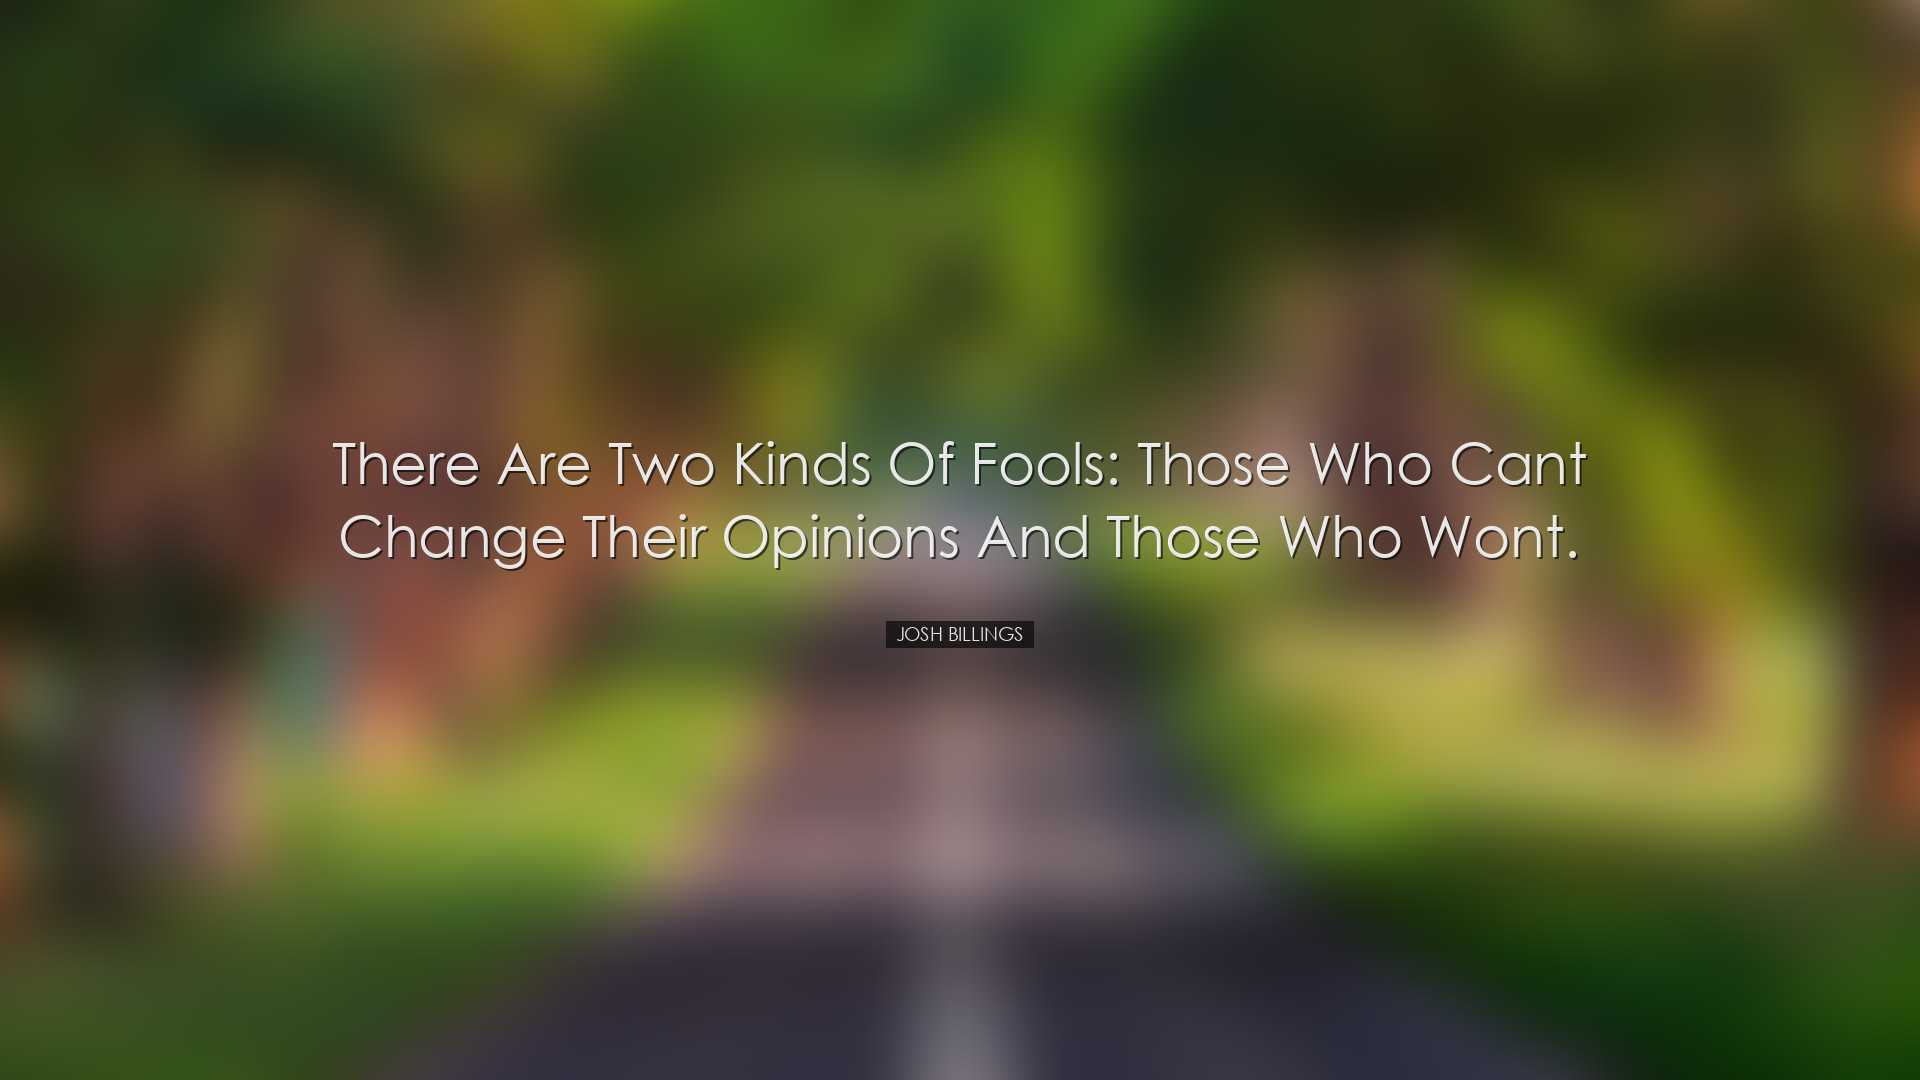 There are two kinds of fools: those who cant change their opinions